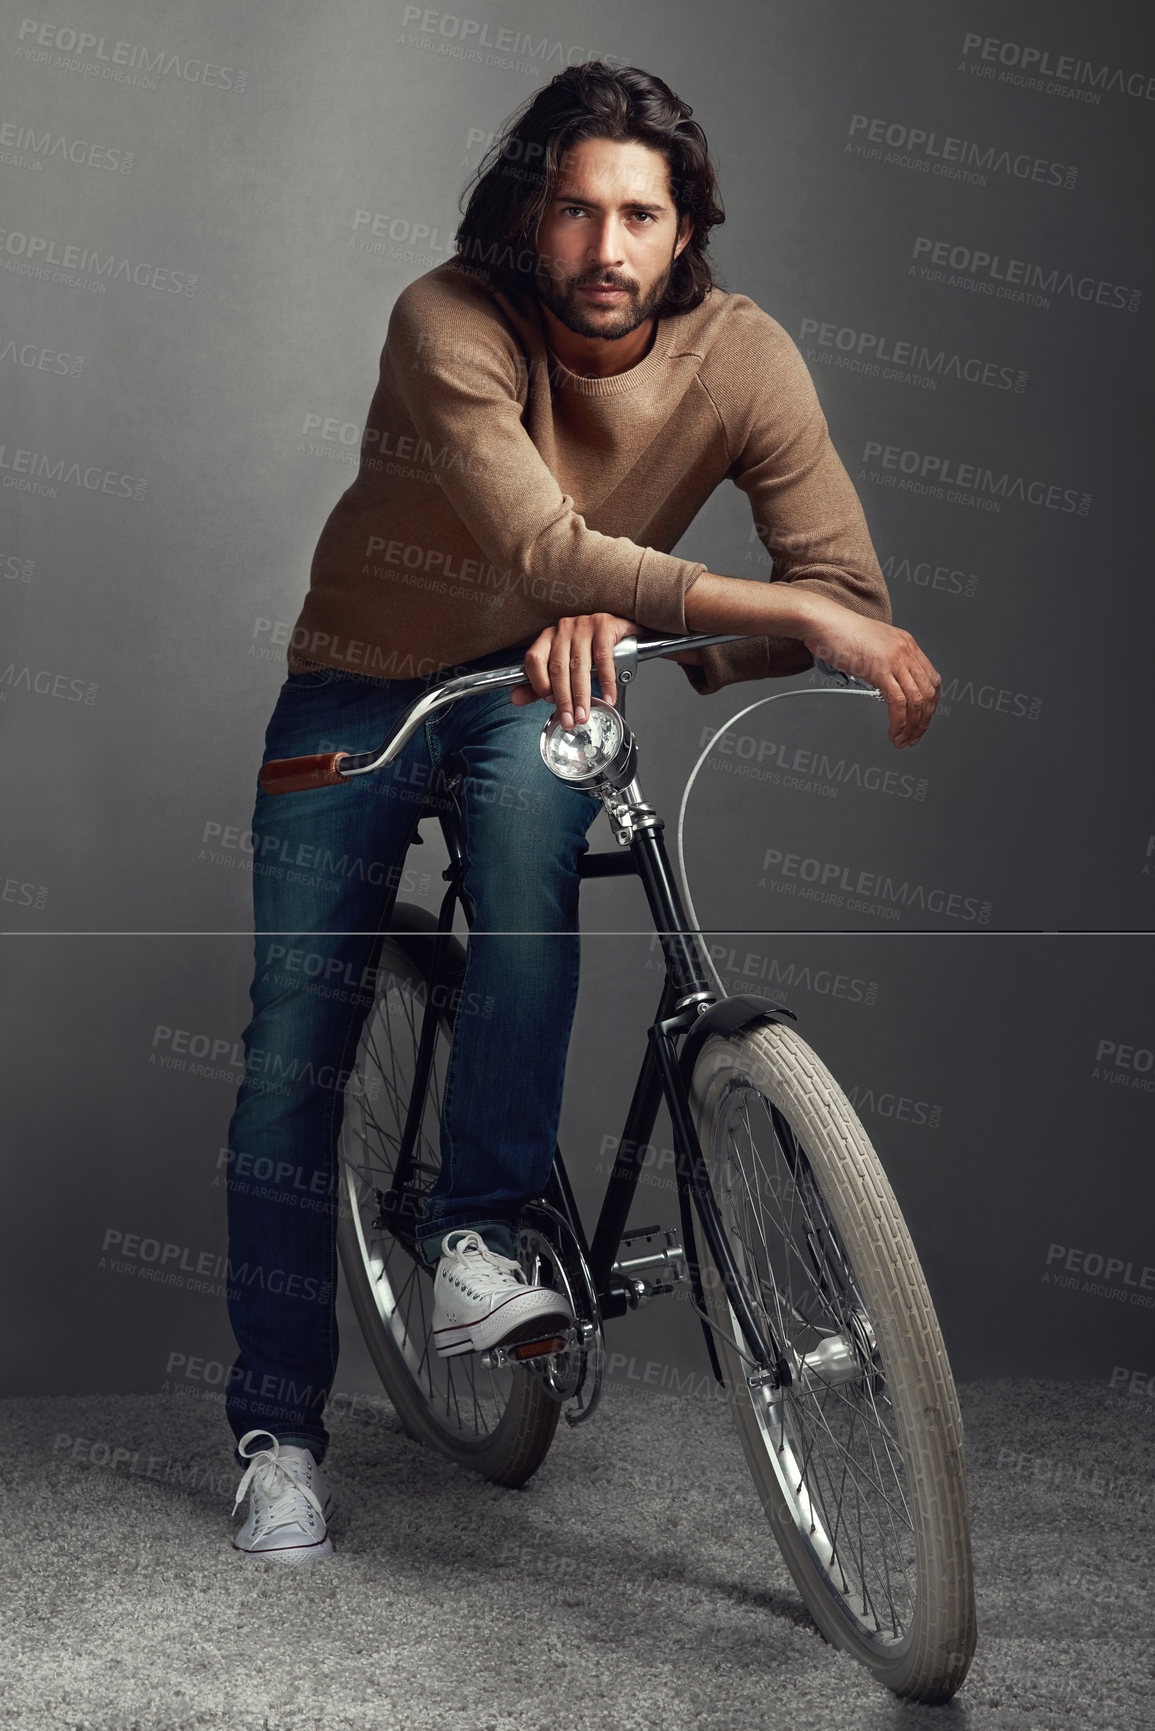 Buy stock photo Studio shot of a handsome young man leaning against a bicycle in front of a gray background